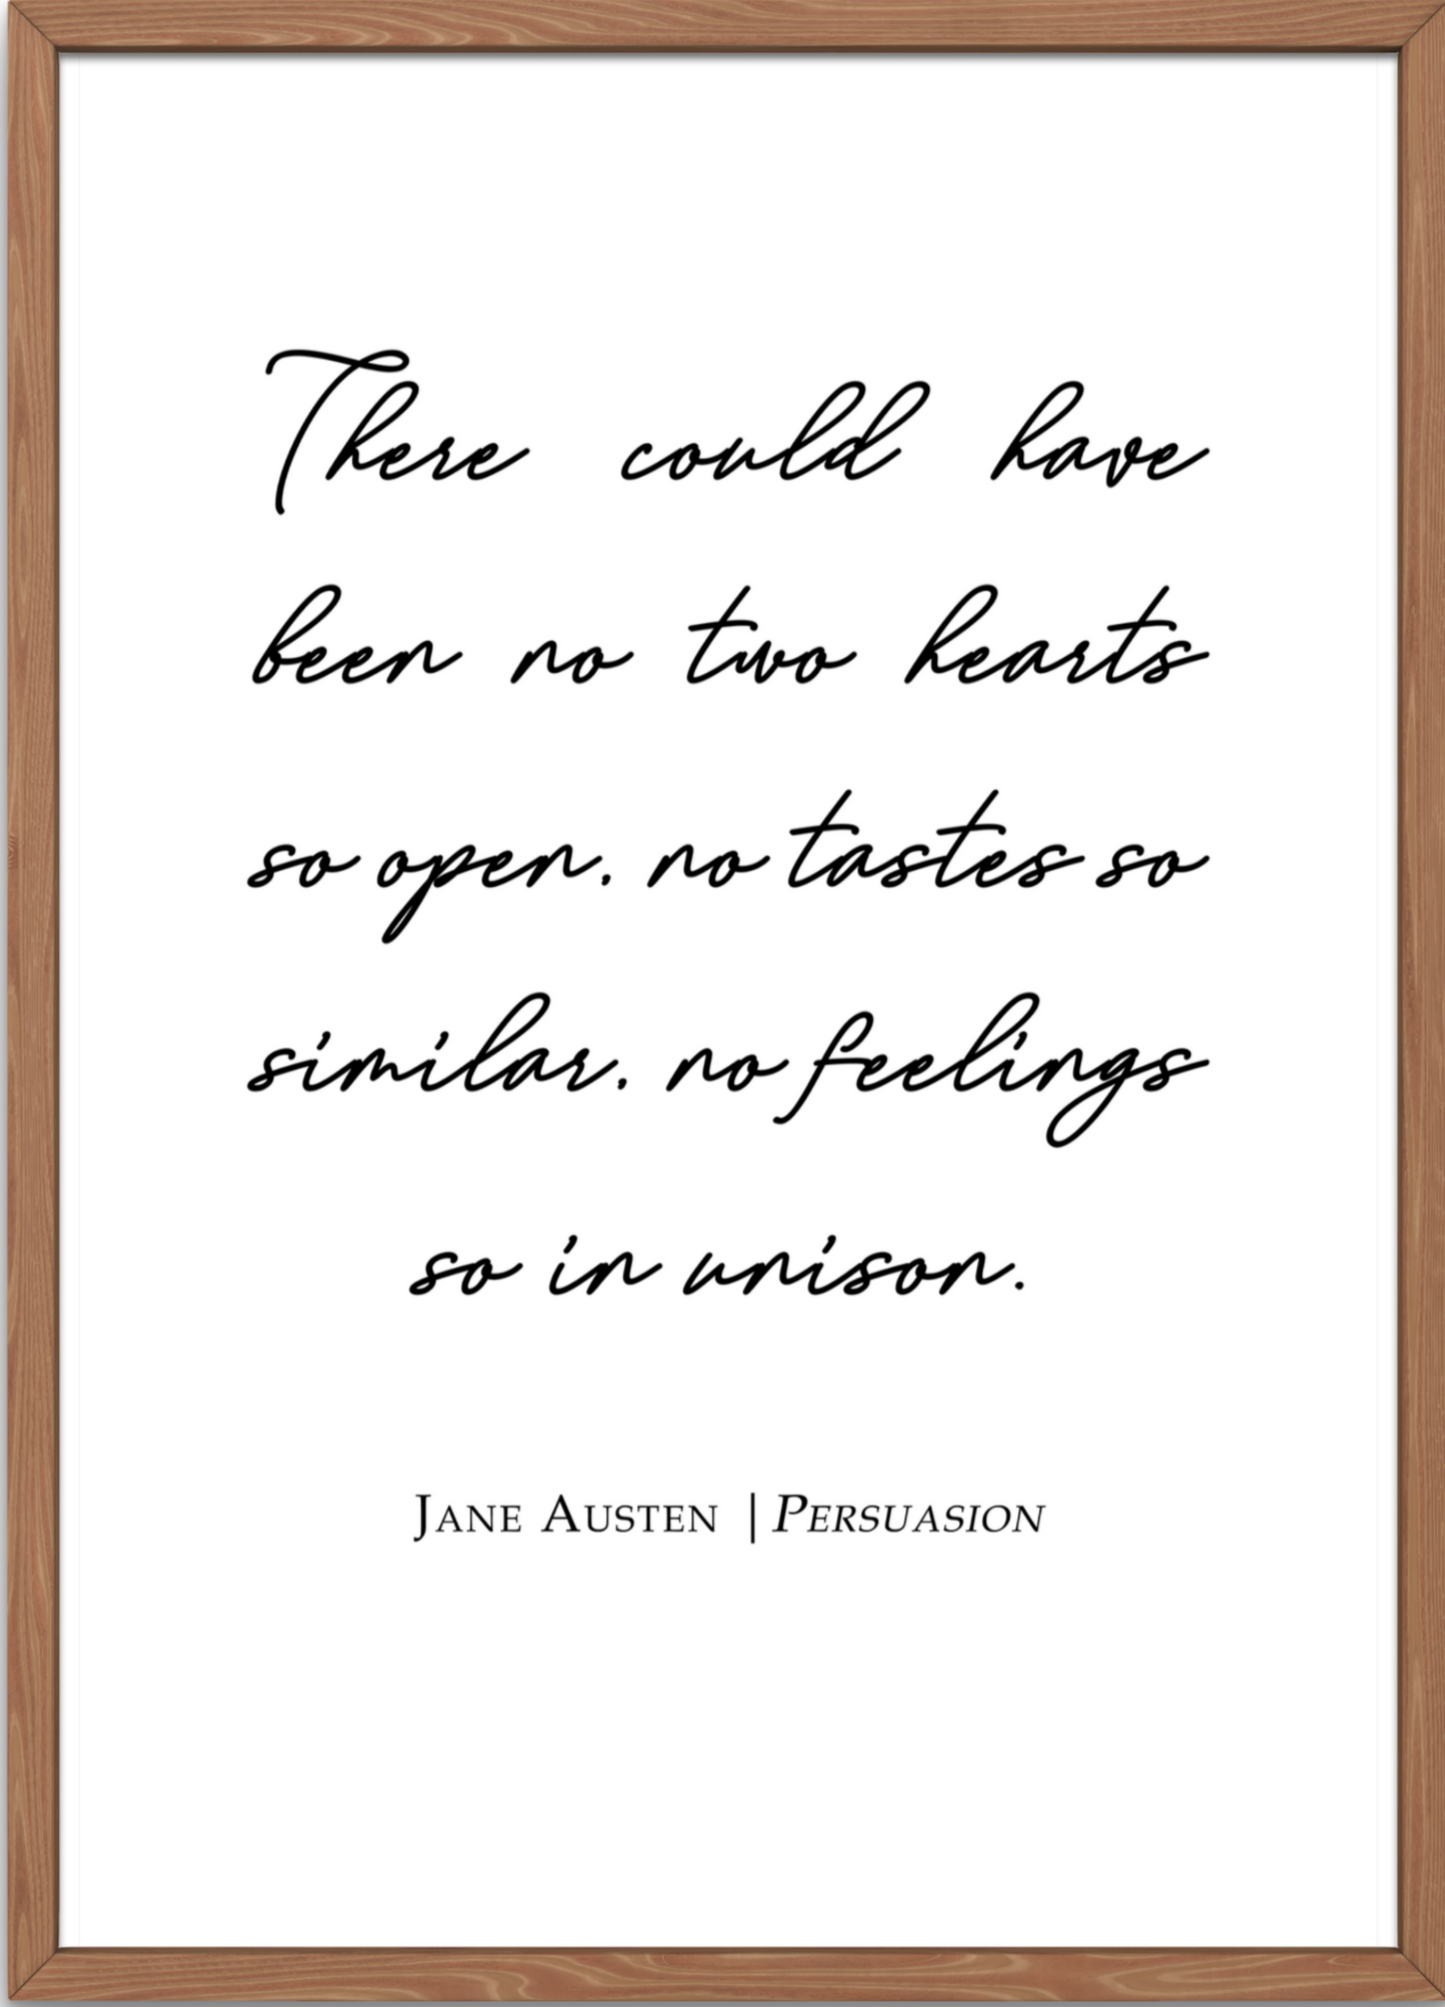 Persuasion - Jane Austen Novel | Captain Wentworth and Anne | No two hearts so open